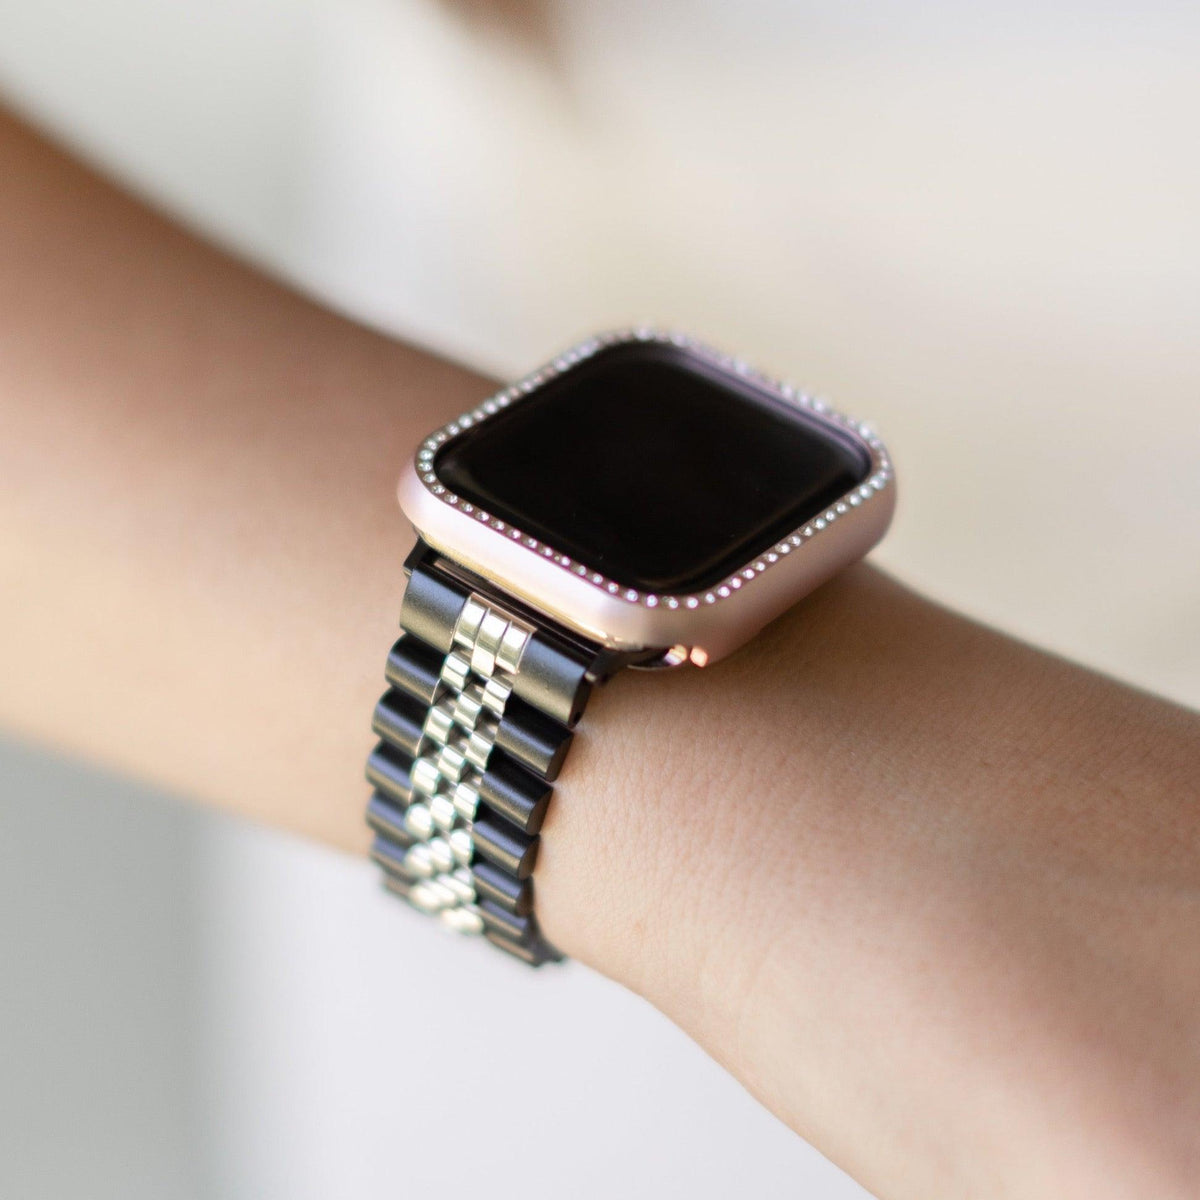 Elle Apple Watch Band Black & Silver - Strawberry Avocados